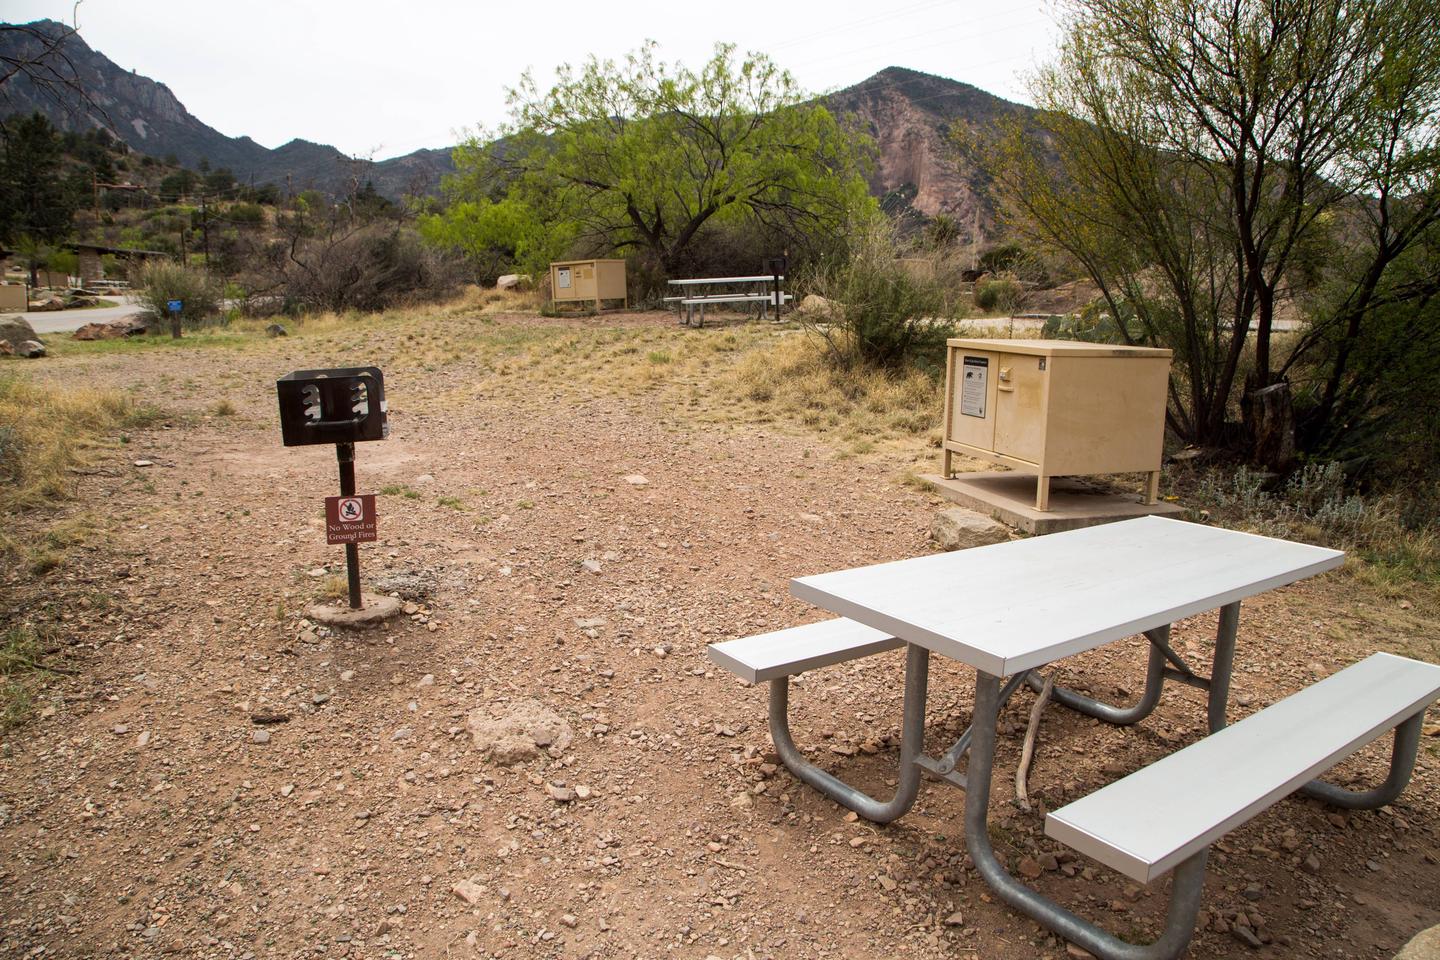 Chisos Basin Campsite #34 site viewView showing grill, tent pad, picnic table, and bear box. Notice no shade ramada or natural shade.
